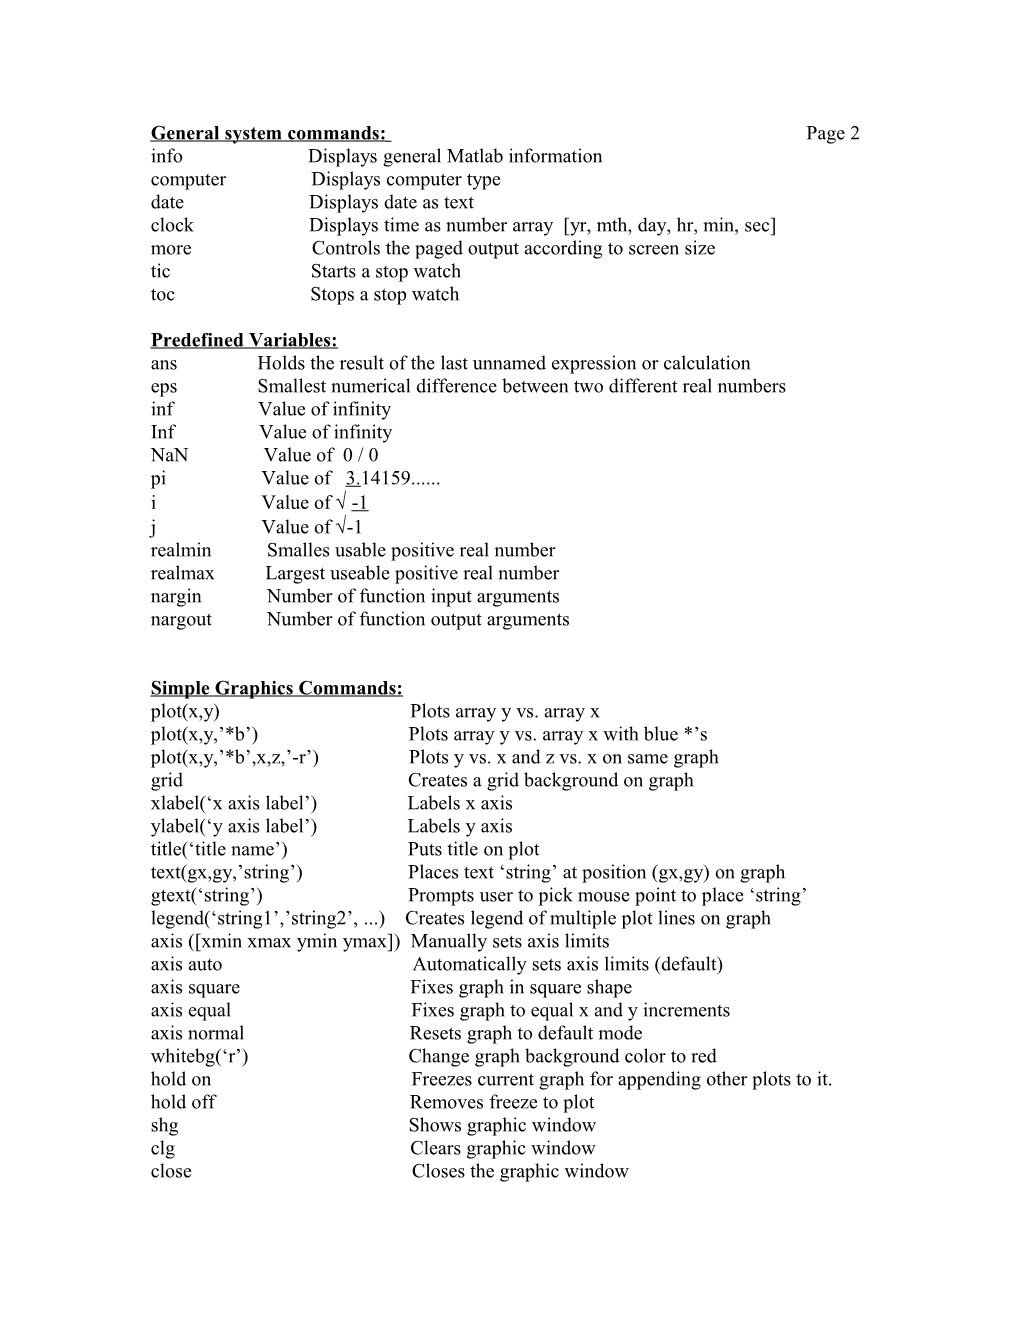 Matlab Quick Command Reference Sheet: Page 1